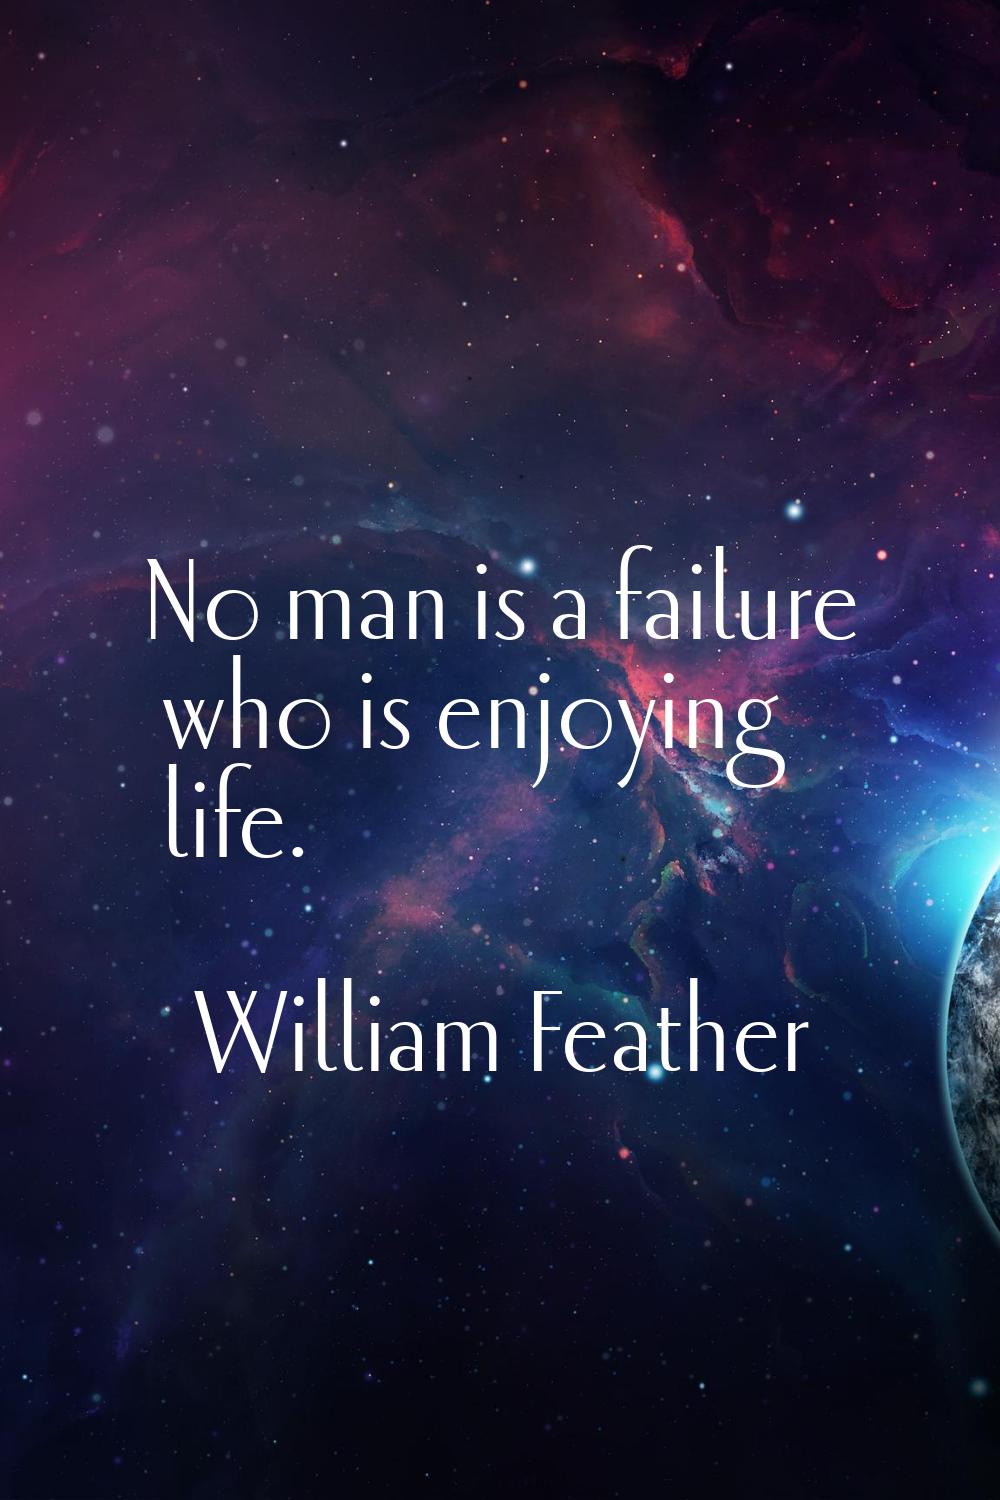 No man is a failure who is enjoying life.